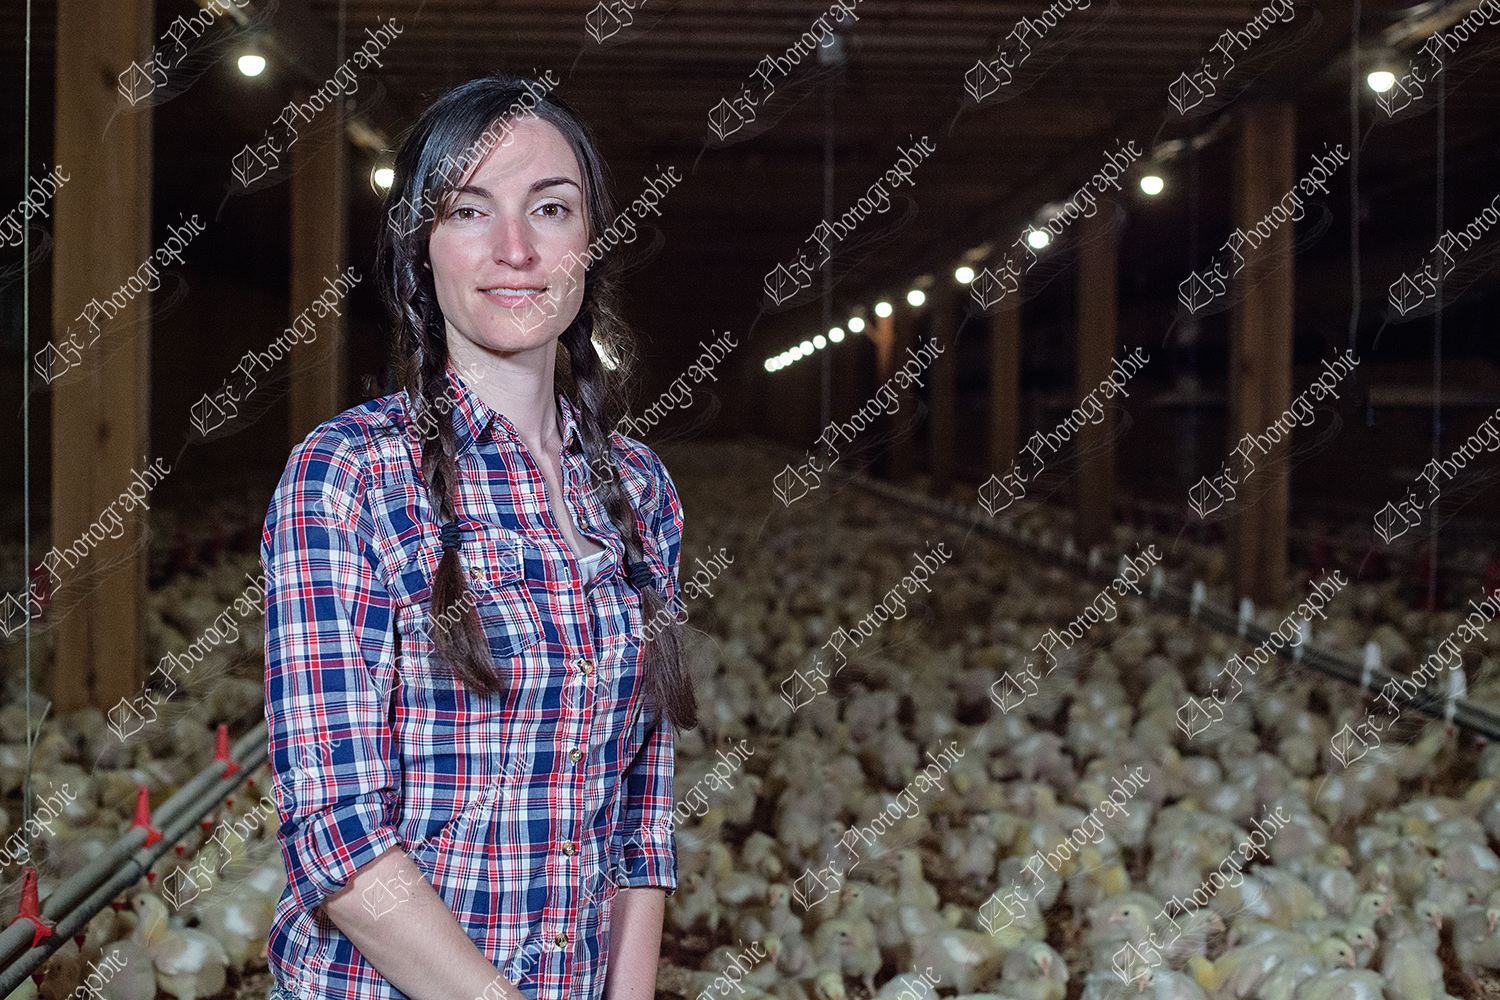 elze_photo_9033_femme_agricultrice_poulailler_young_farmer_chicken